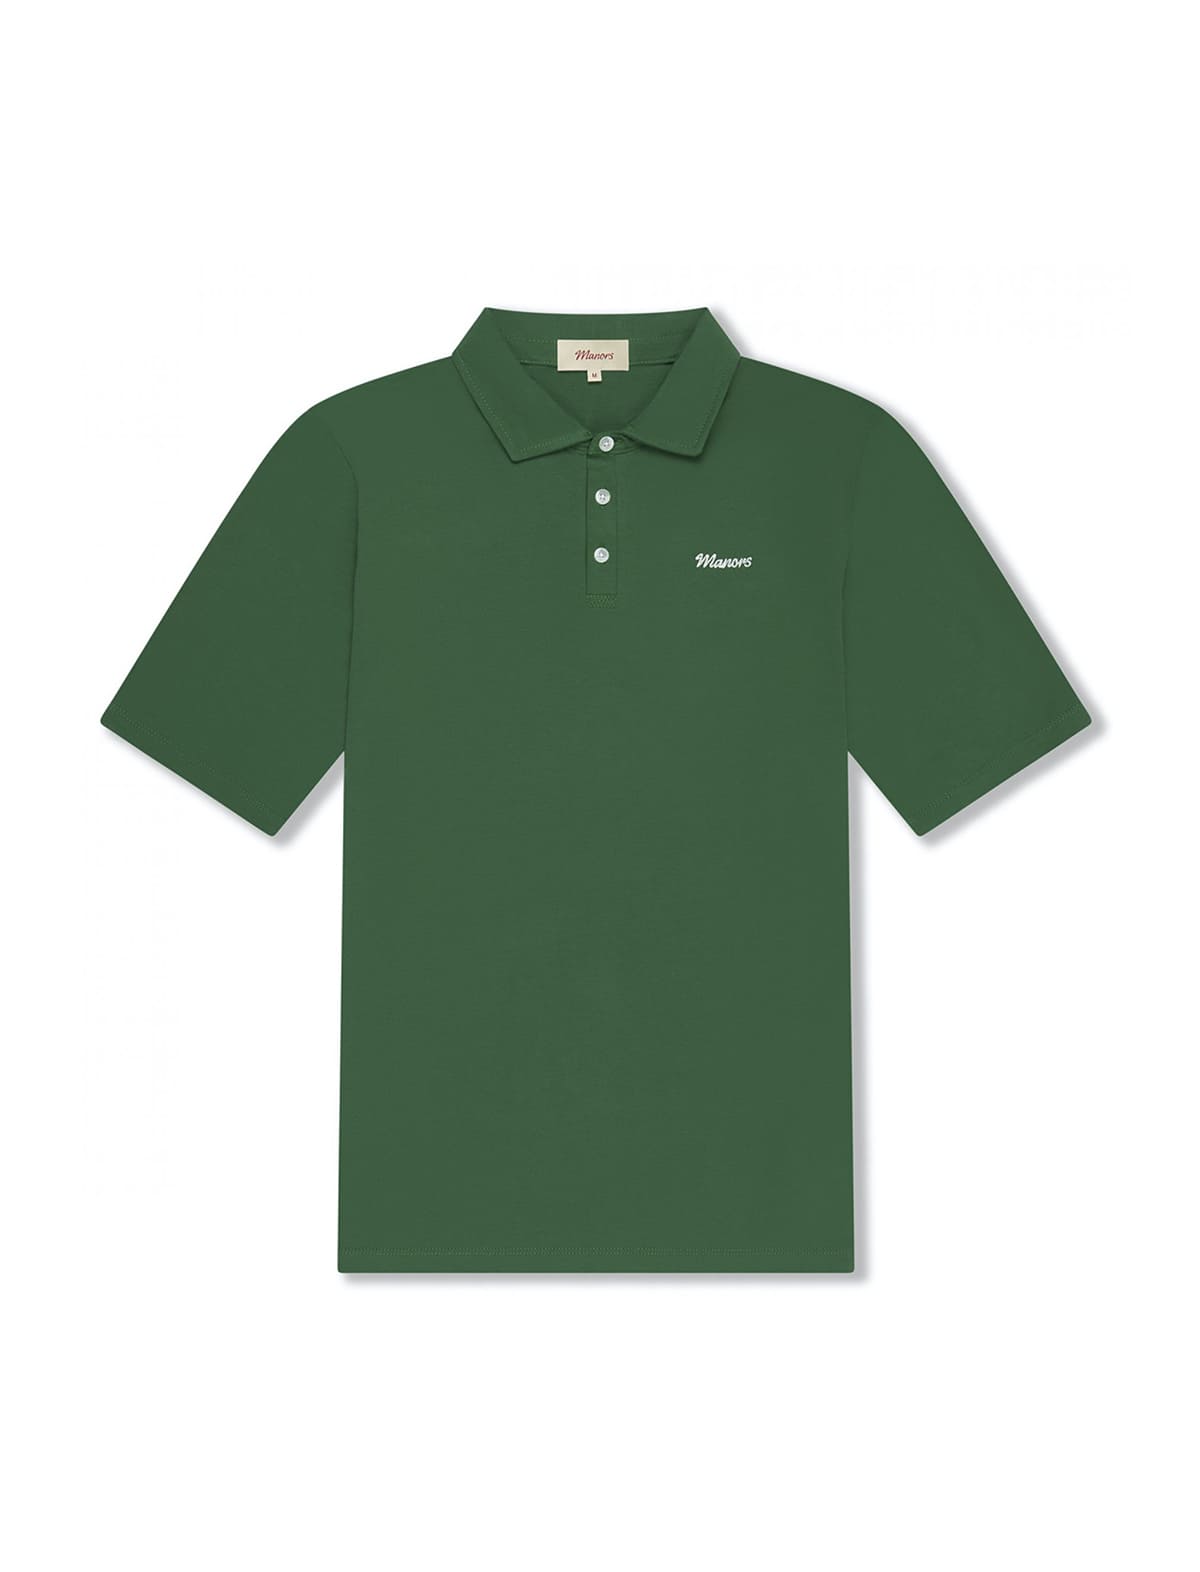 MANORS GOLF Classic Polo Shirt in Green